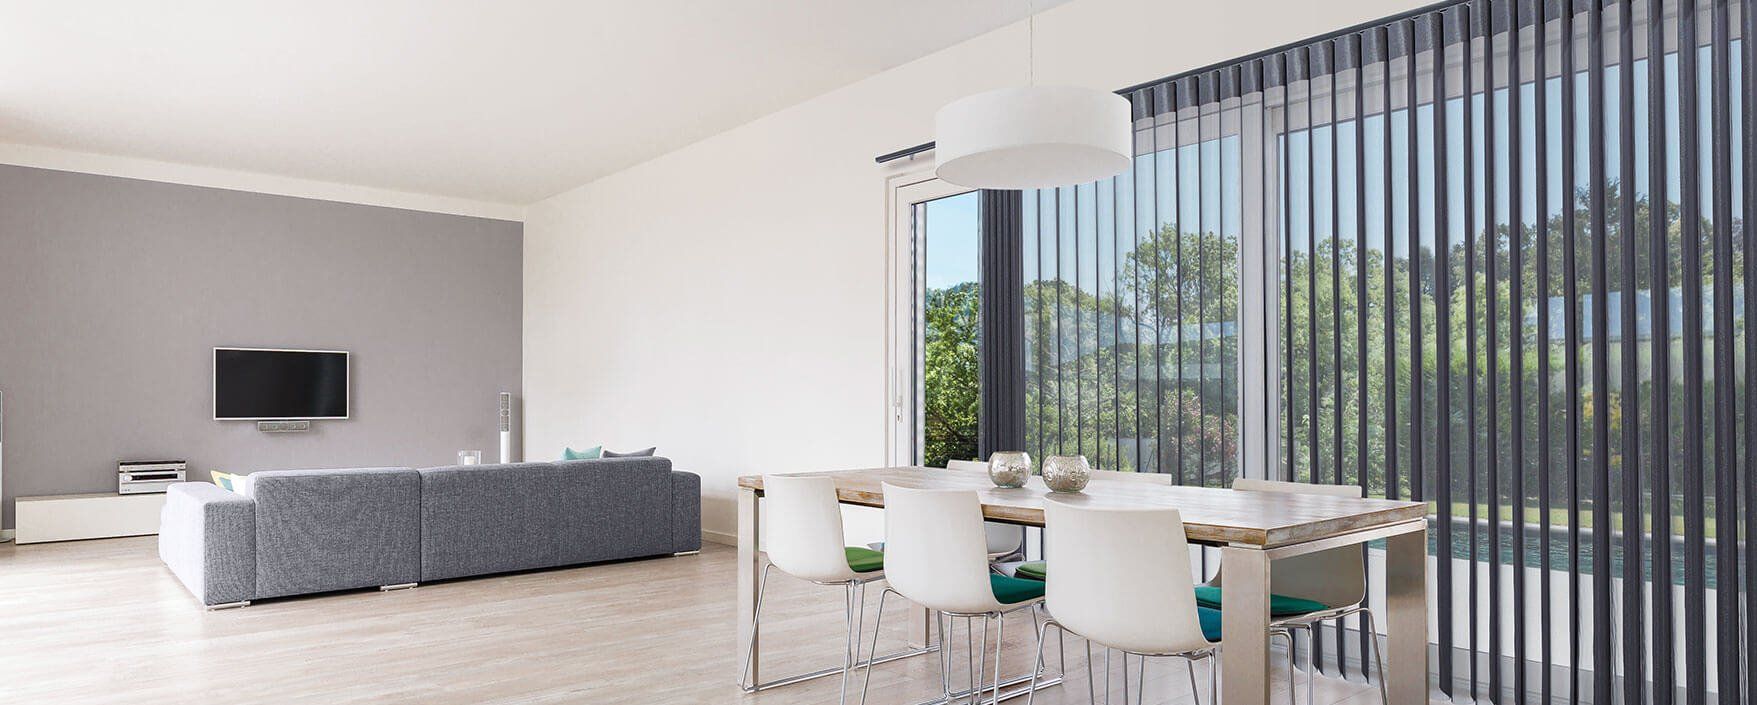 Soft Shade Black Blinds — Simply Smarter Blinds in Nelson Bay, NSW